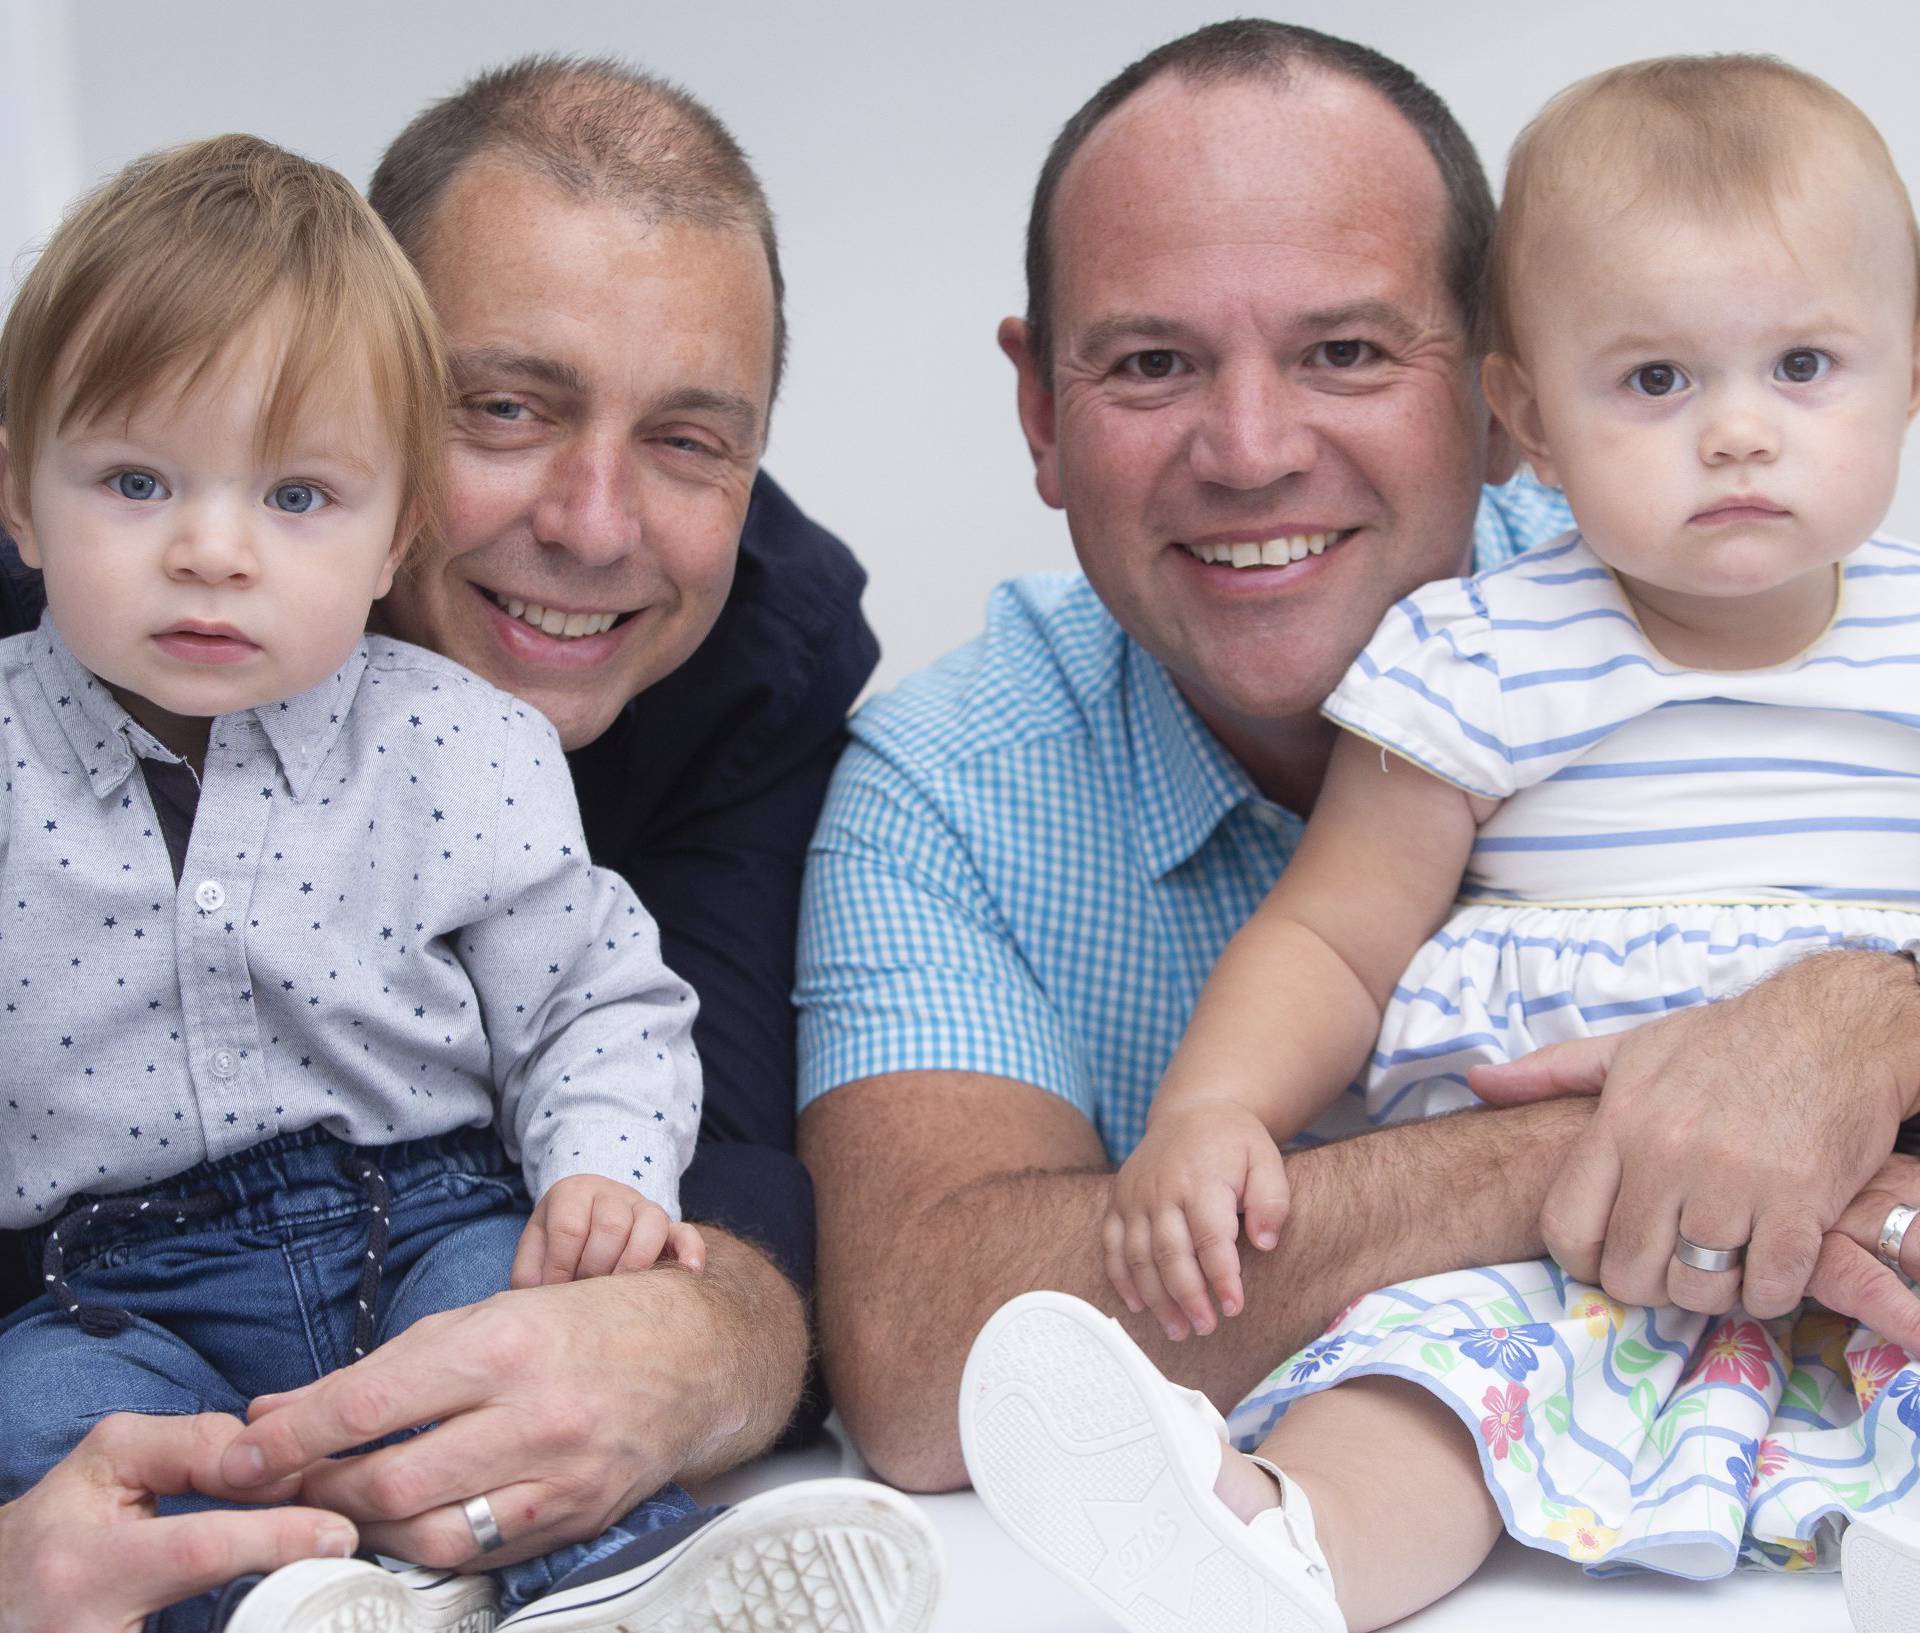 Baby Twins Have Different Dads In Britain